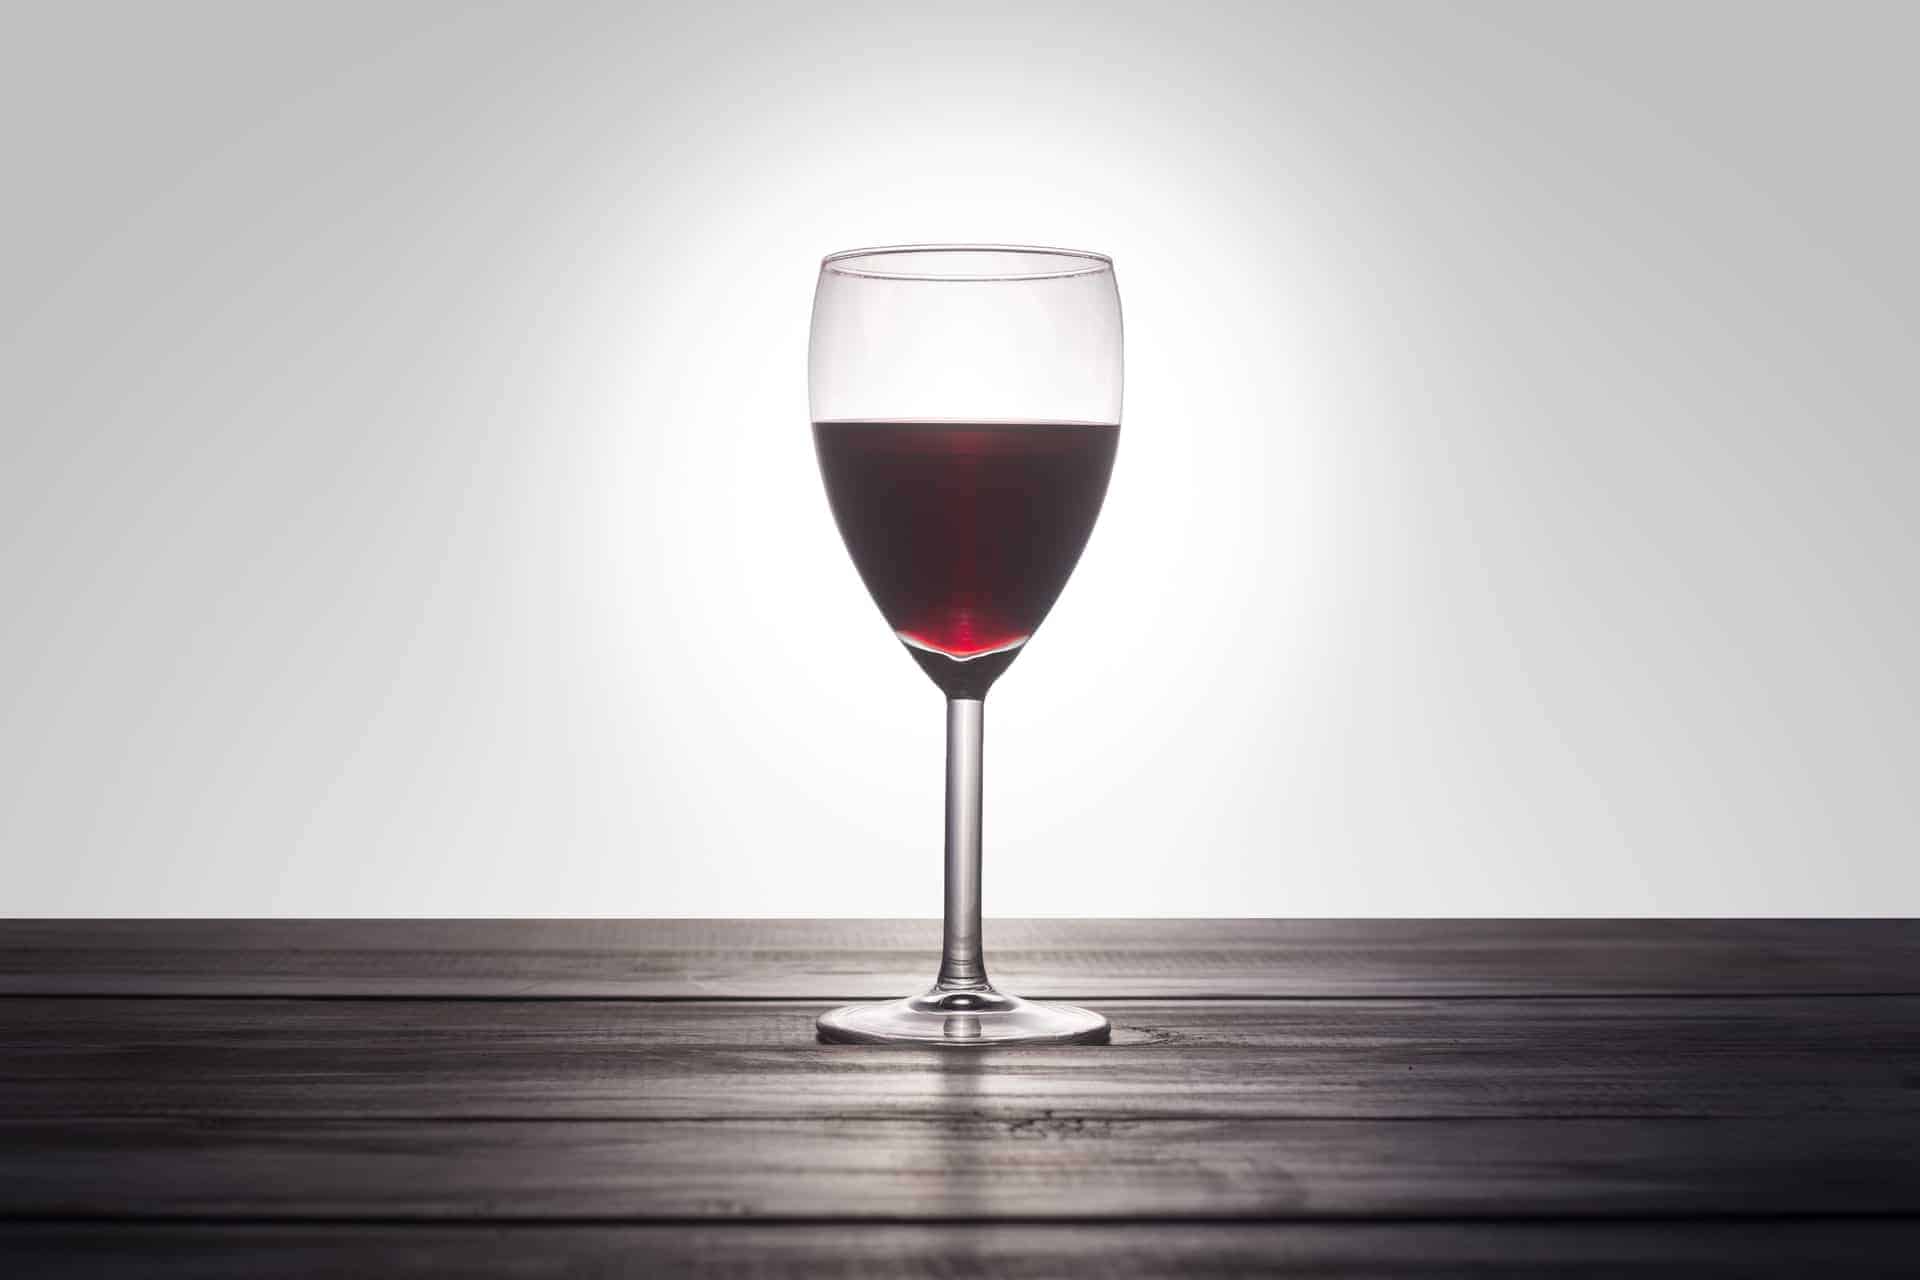 What should you consider when choosing the best wine?